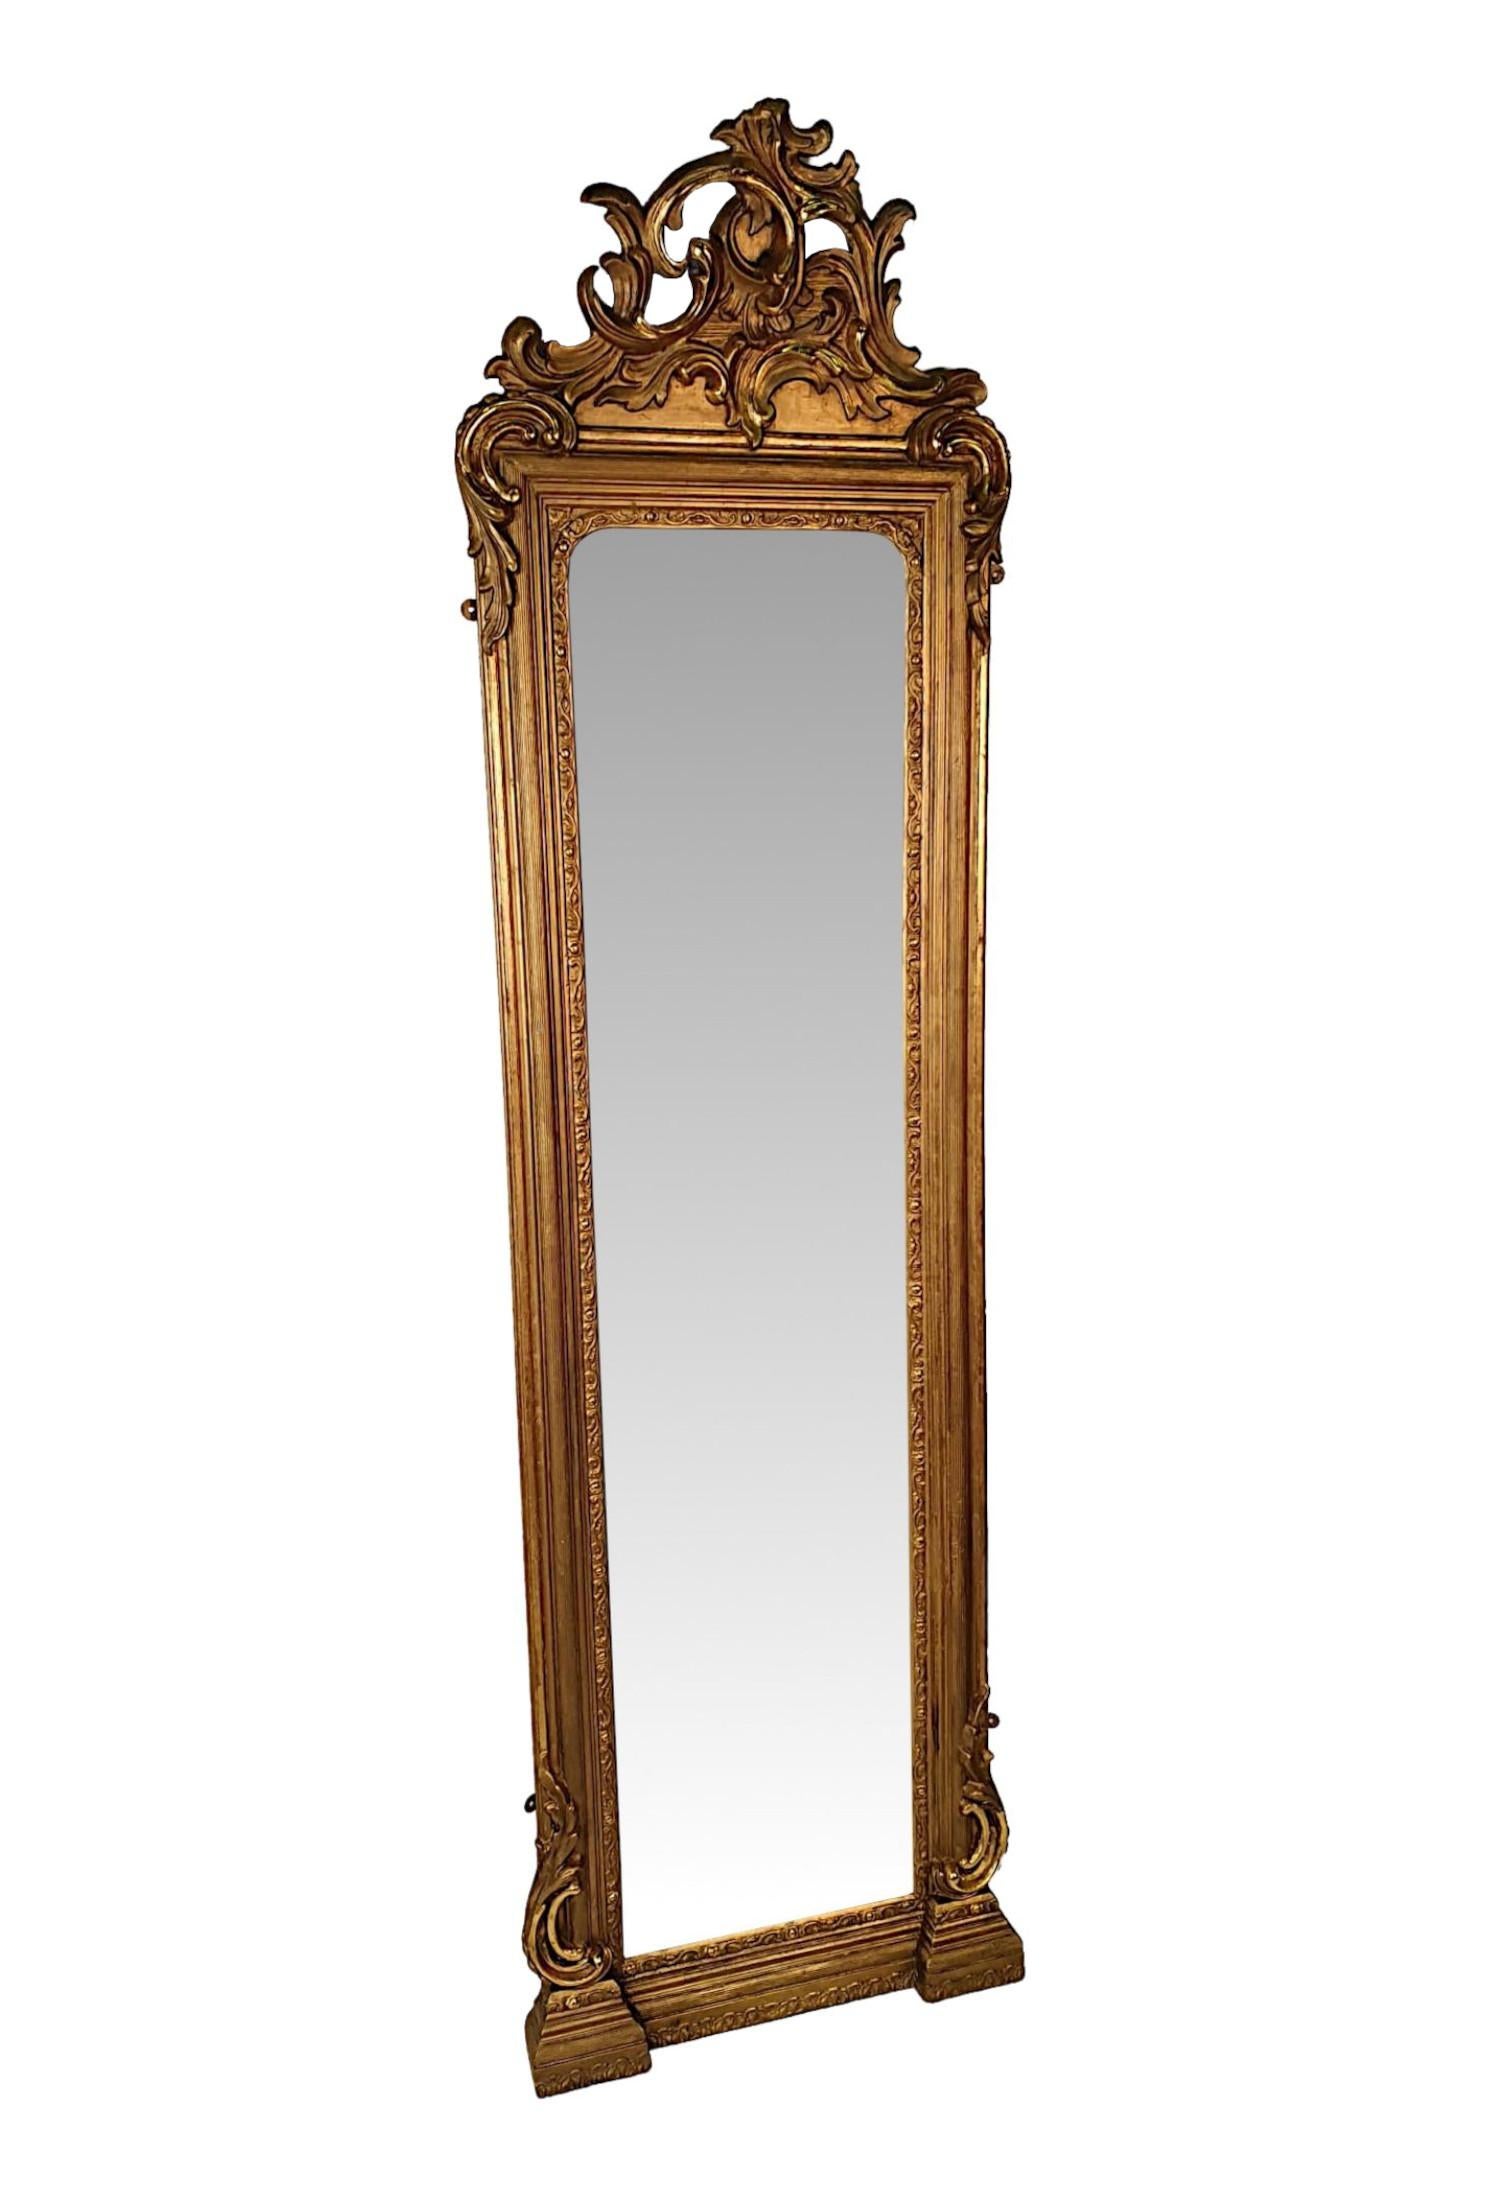 A very fine and rare 19th Century giltwood pier or dressing mirror of large and narrow proportions. The mirror glass plate of rectangular form set within a beautifully moulded giltwood frame with reeding, scroll and foliate motif detail, surmounted